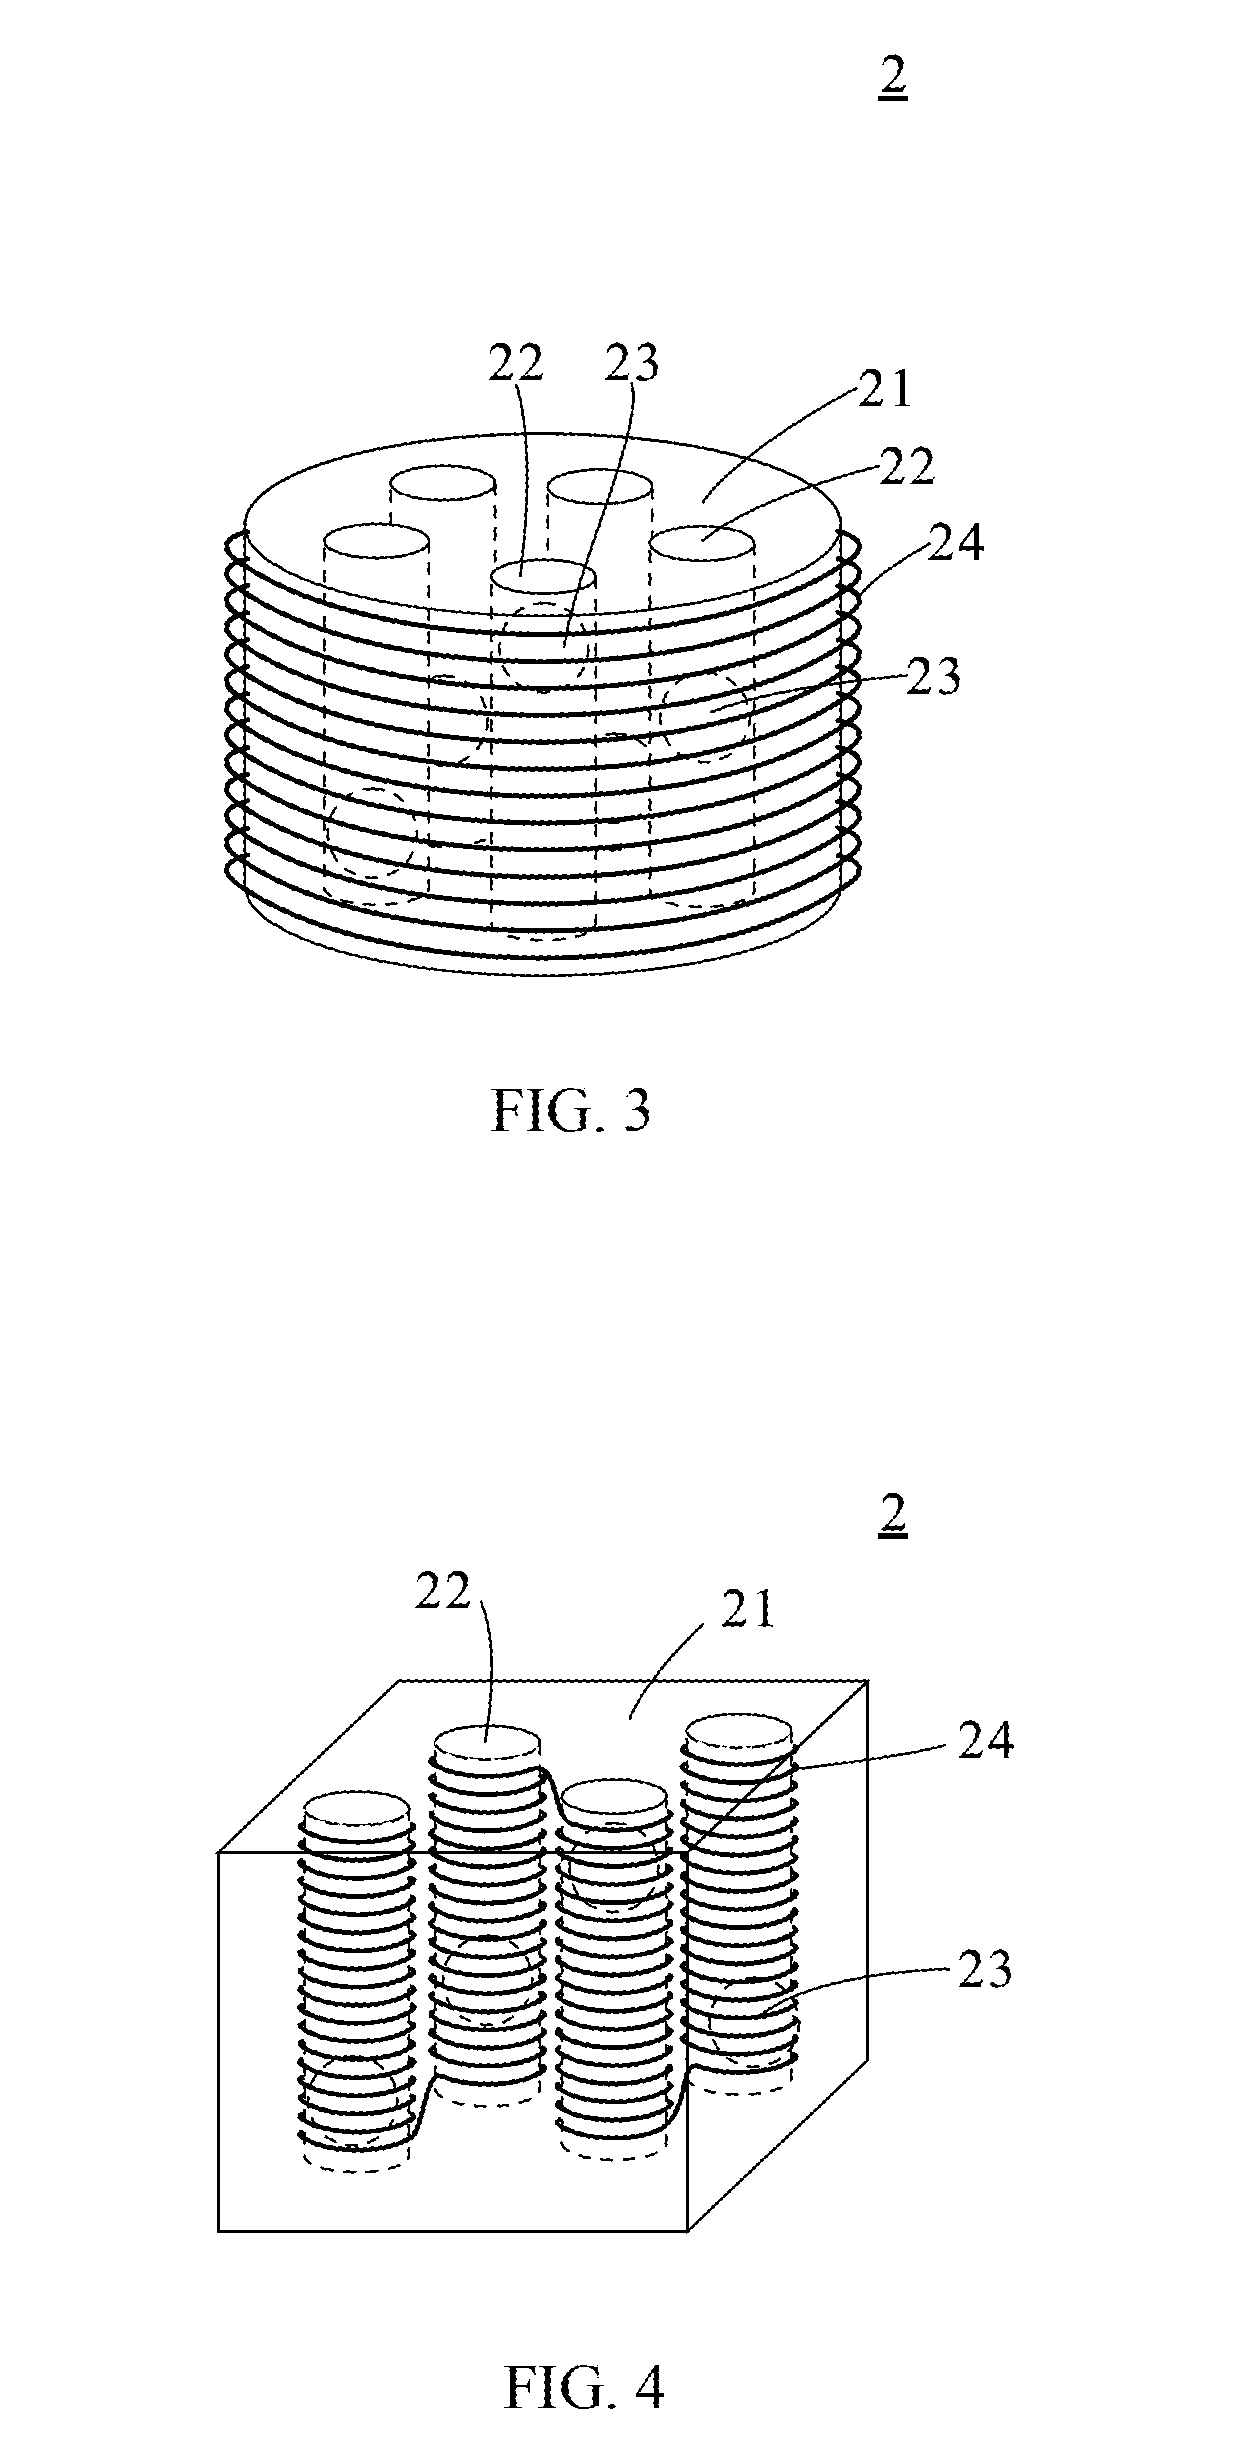 Geomorphological structure monitoring system